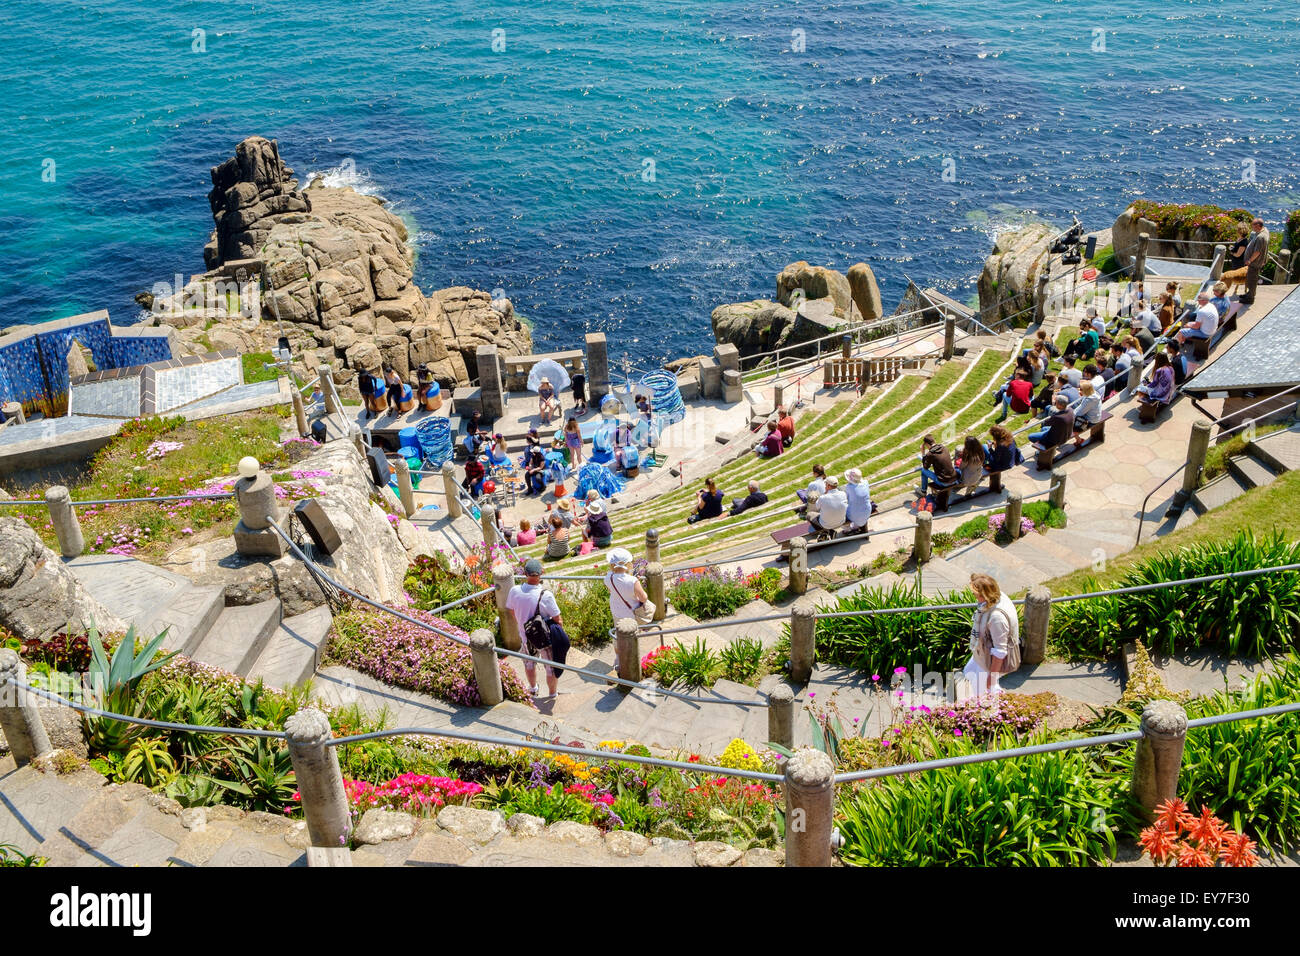 The Minack Theatre overlooking the sea at Porthcurno near Penzance, Cornwall, England, UK Stock Photo